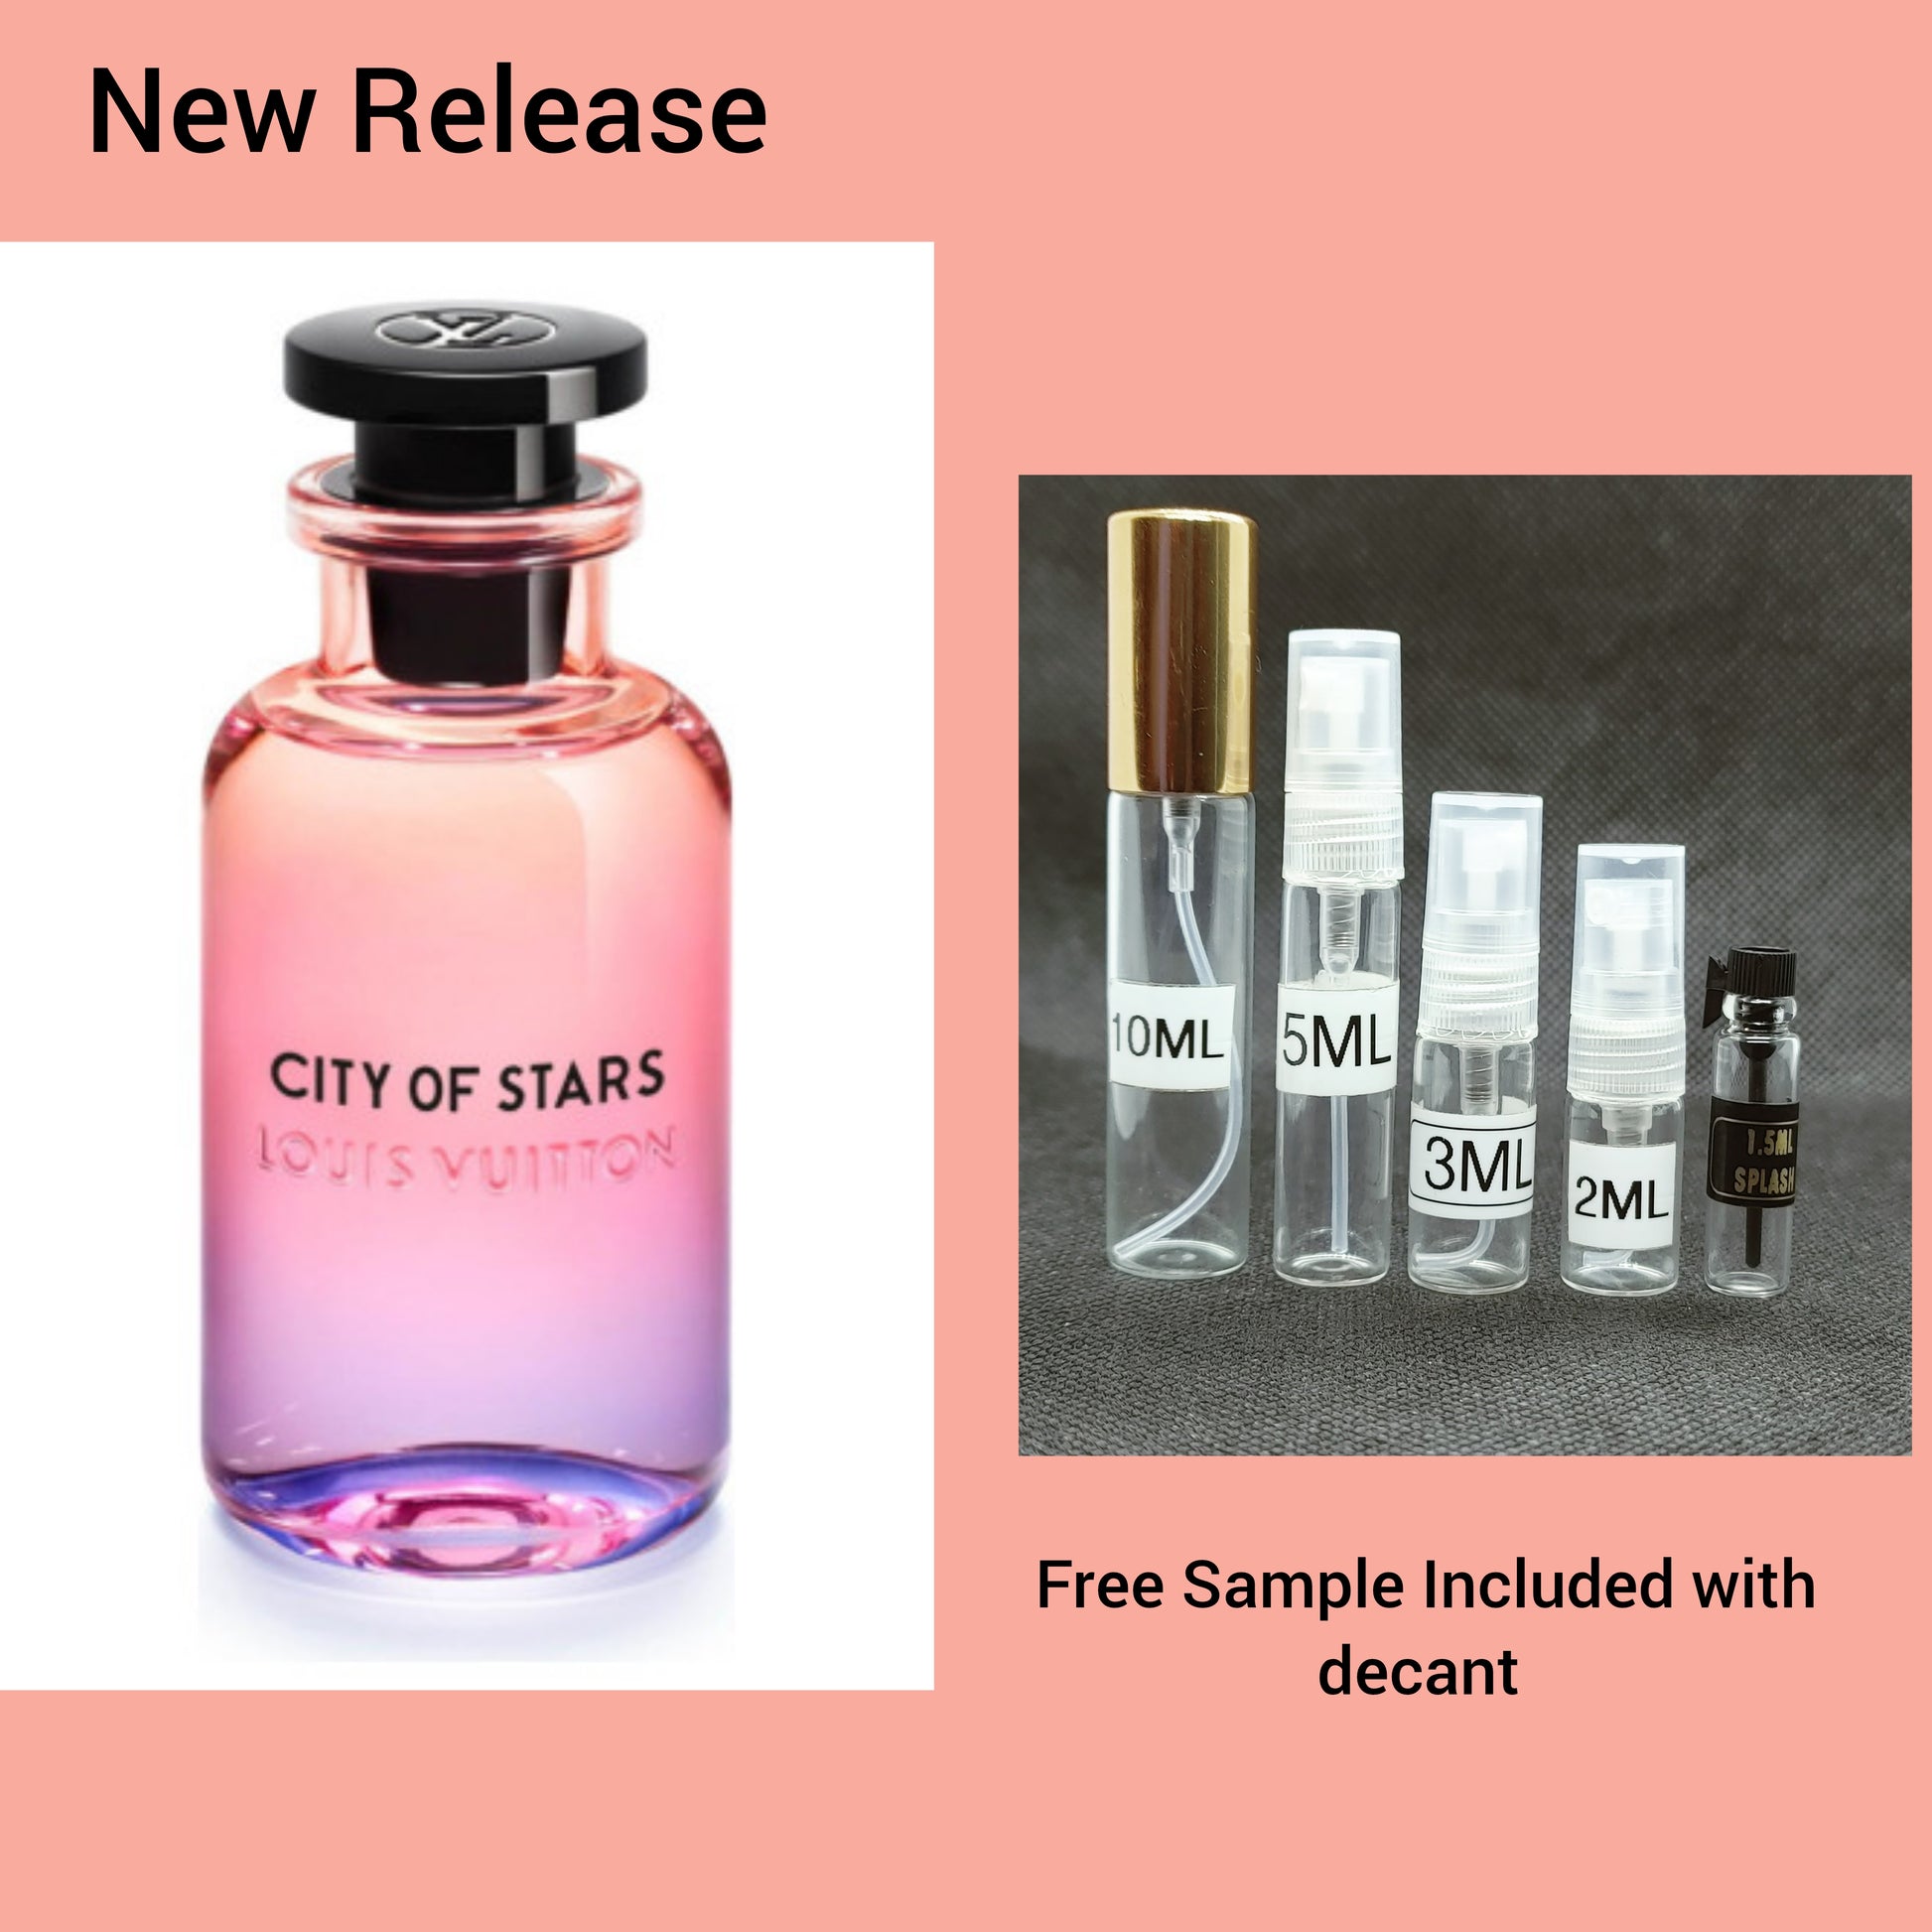 City of Dua - DUA FRAGRANCES - Inspired by City of Stars Louis